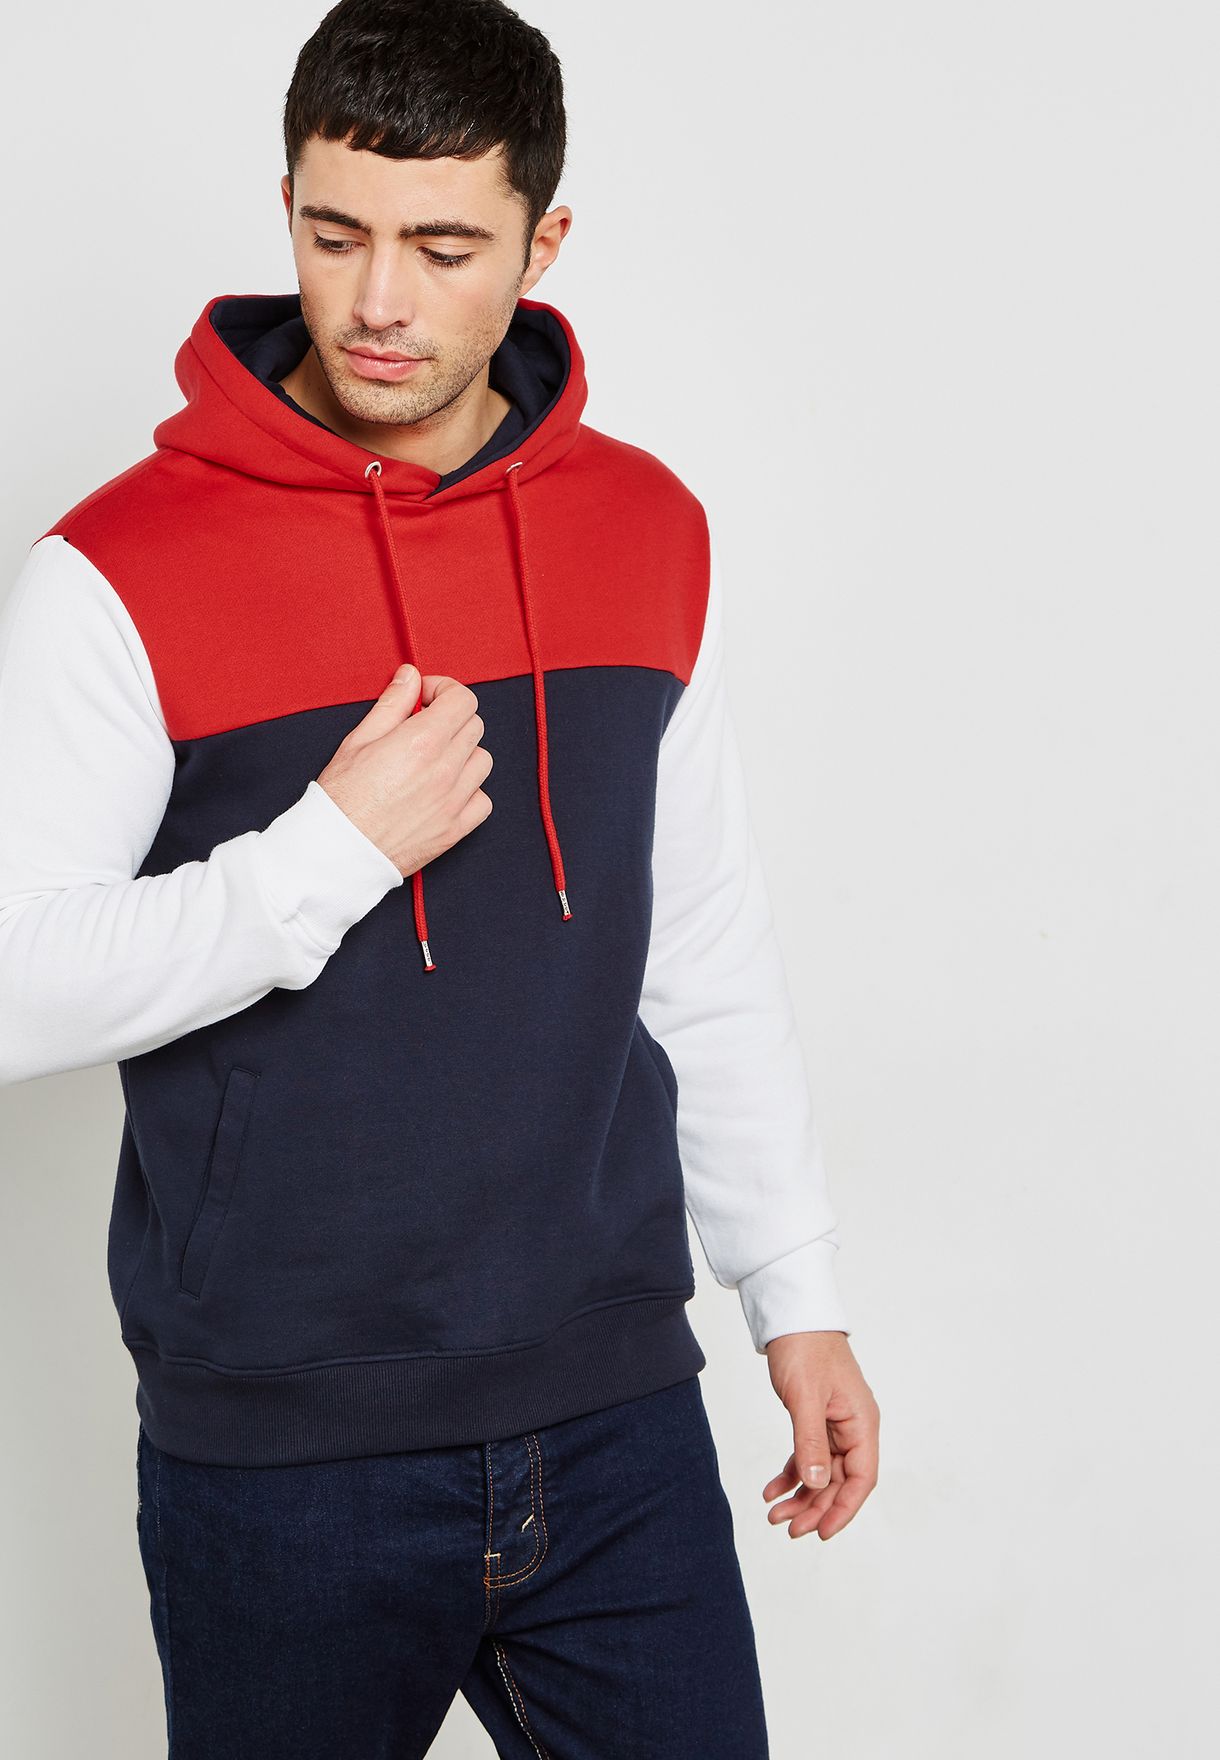 red hoodie forever 21